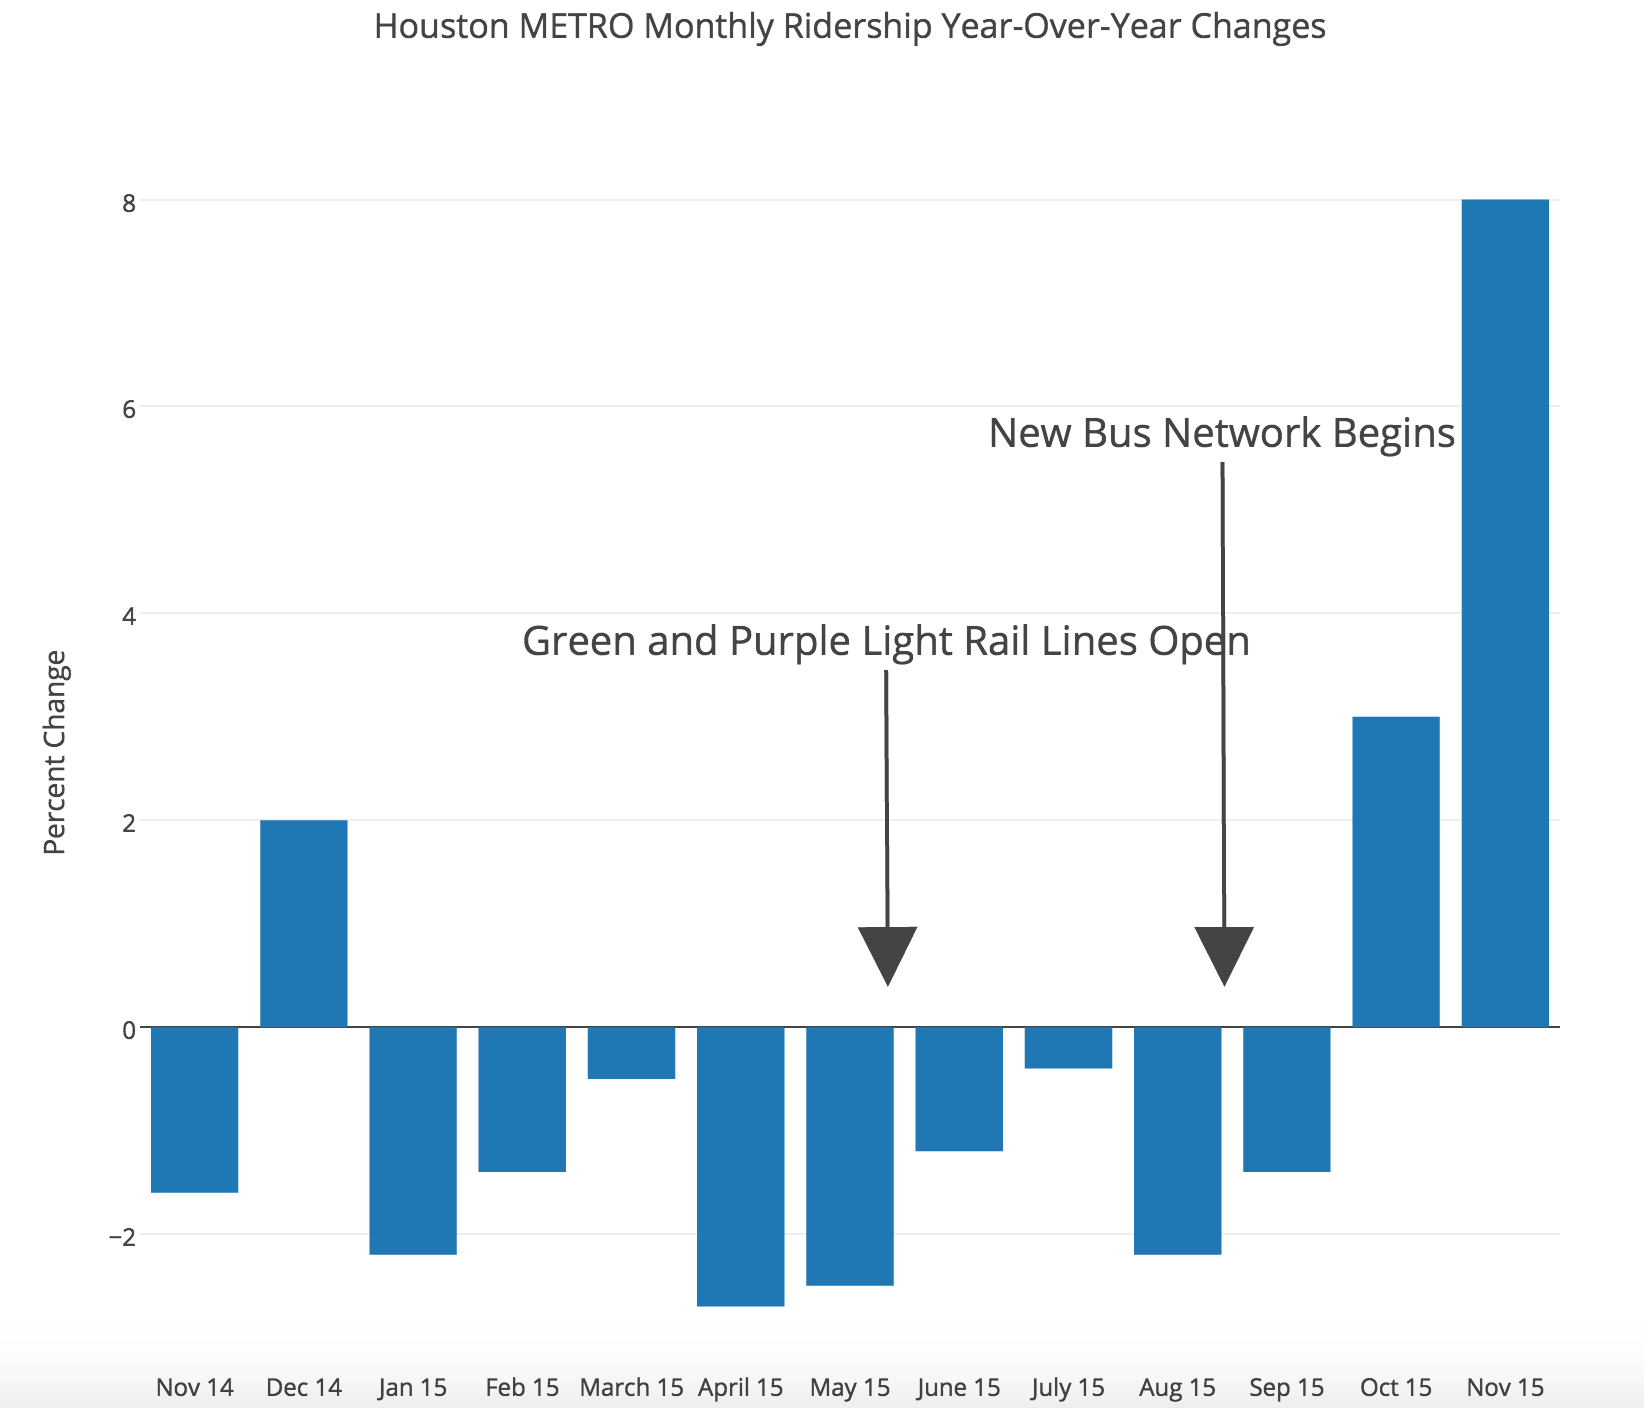 Houston METRO monthly ridership year-over-year changes